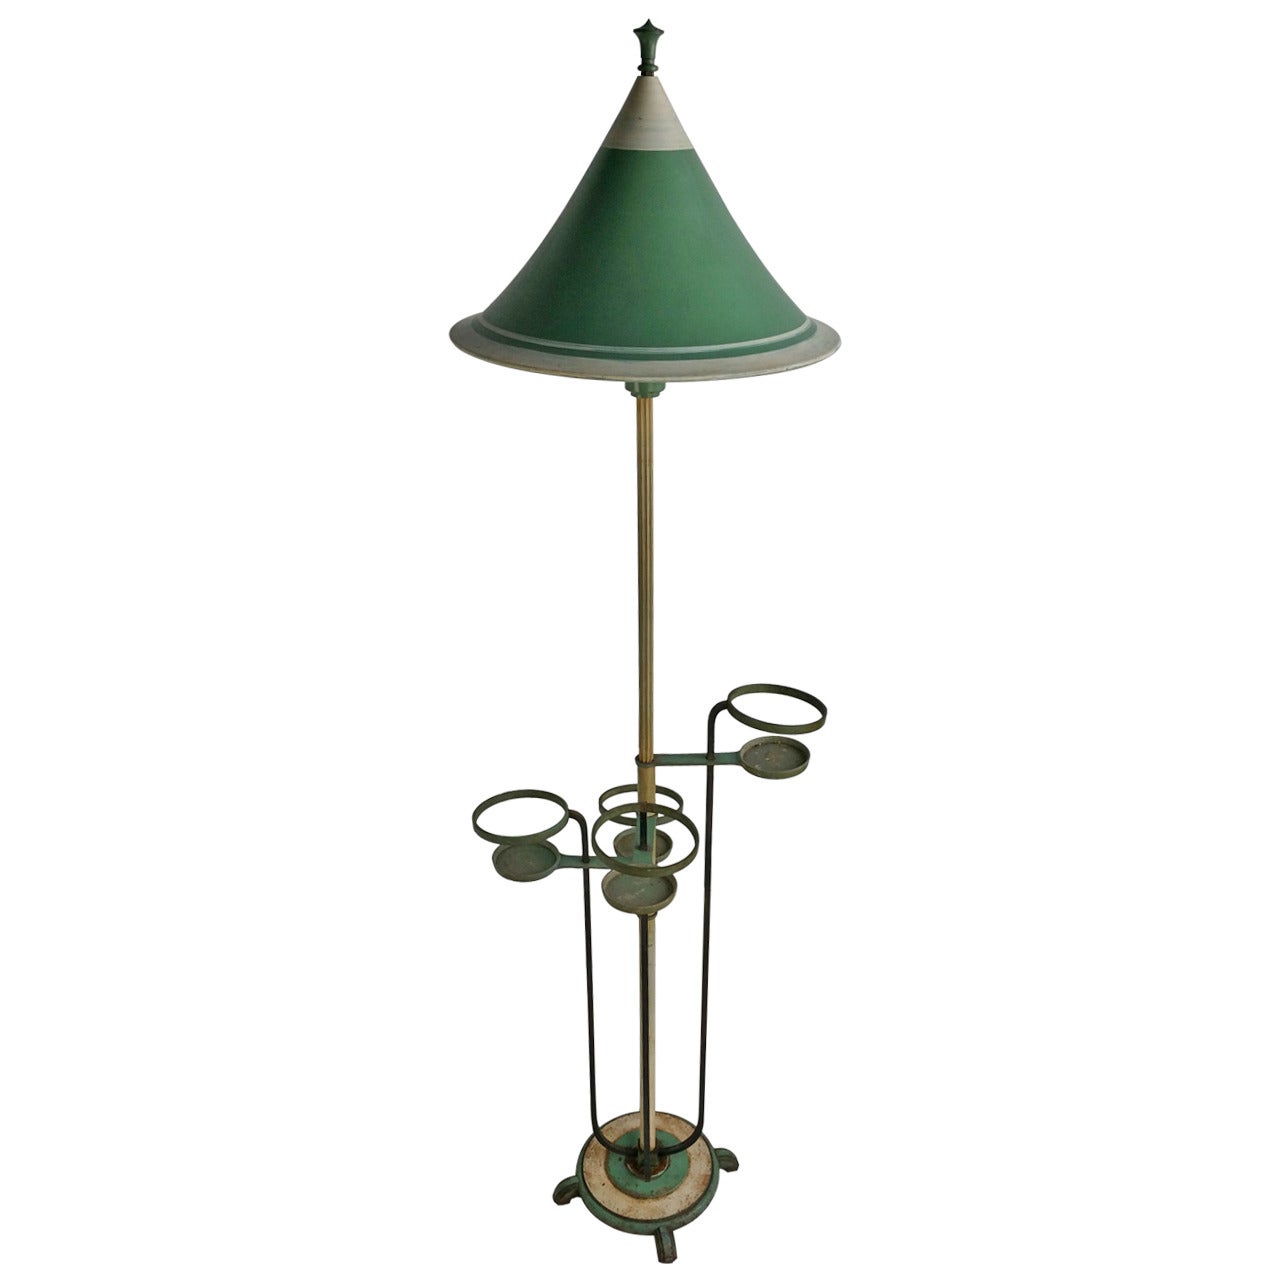 Unusual Art Deco Floor Lamp in Aluminum, Brass and Iron, circa Late 1920s For Sale